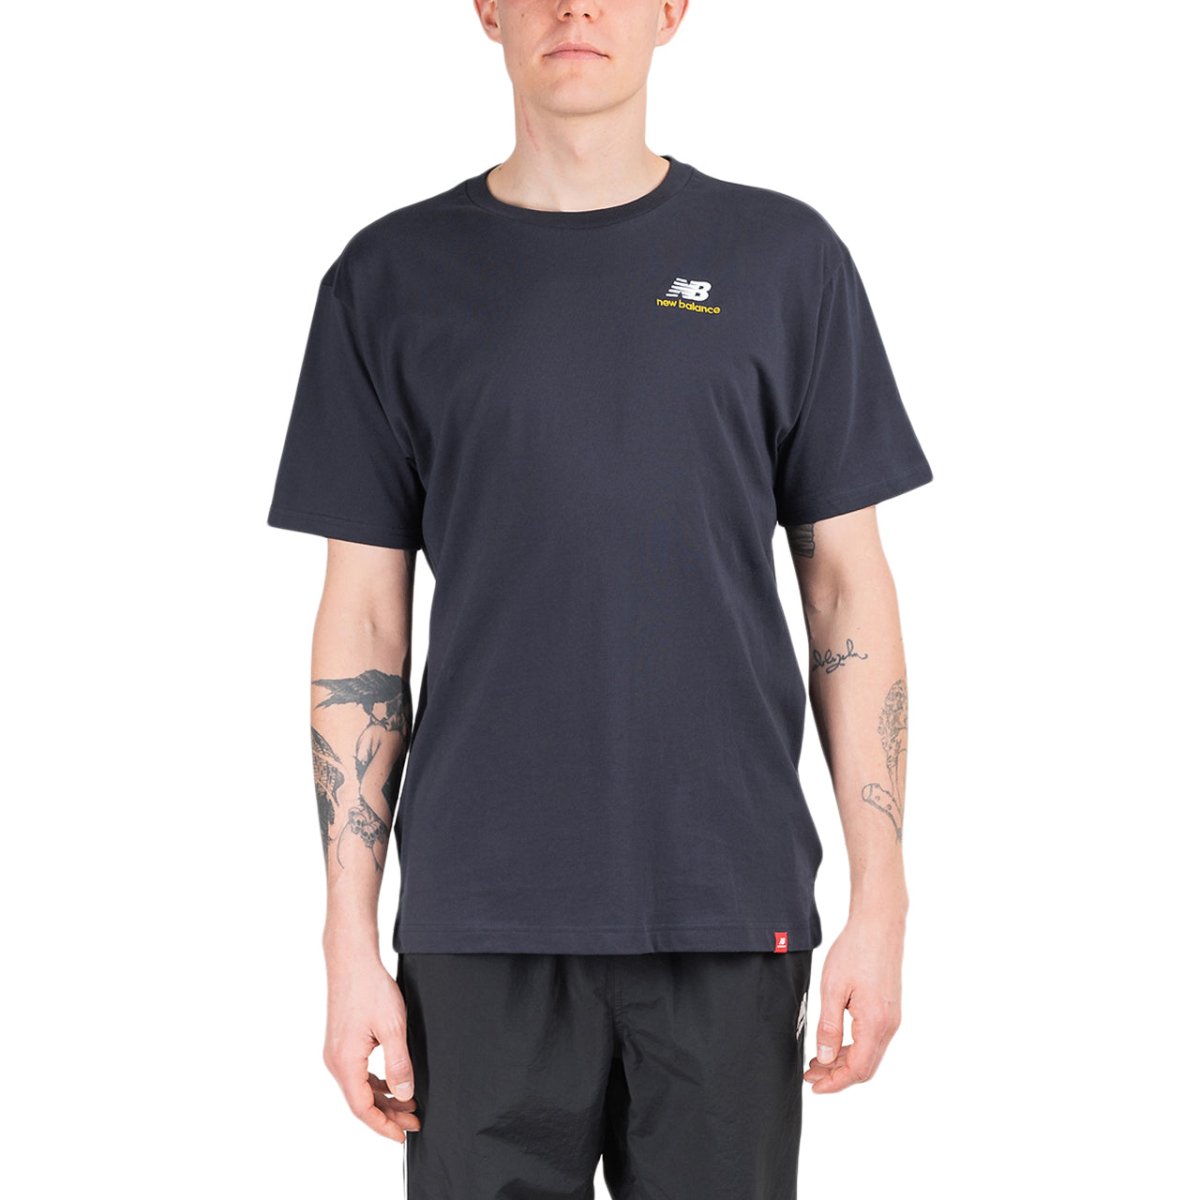 Image of New Balance Essentials Embroidered T-Shirt (Navy)